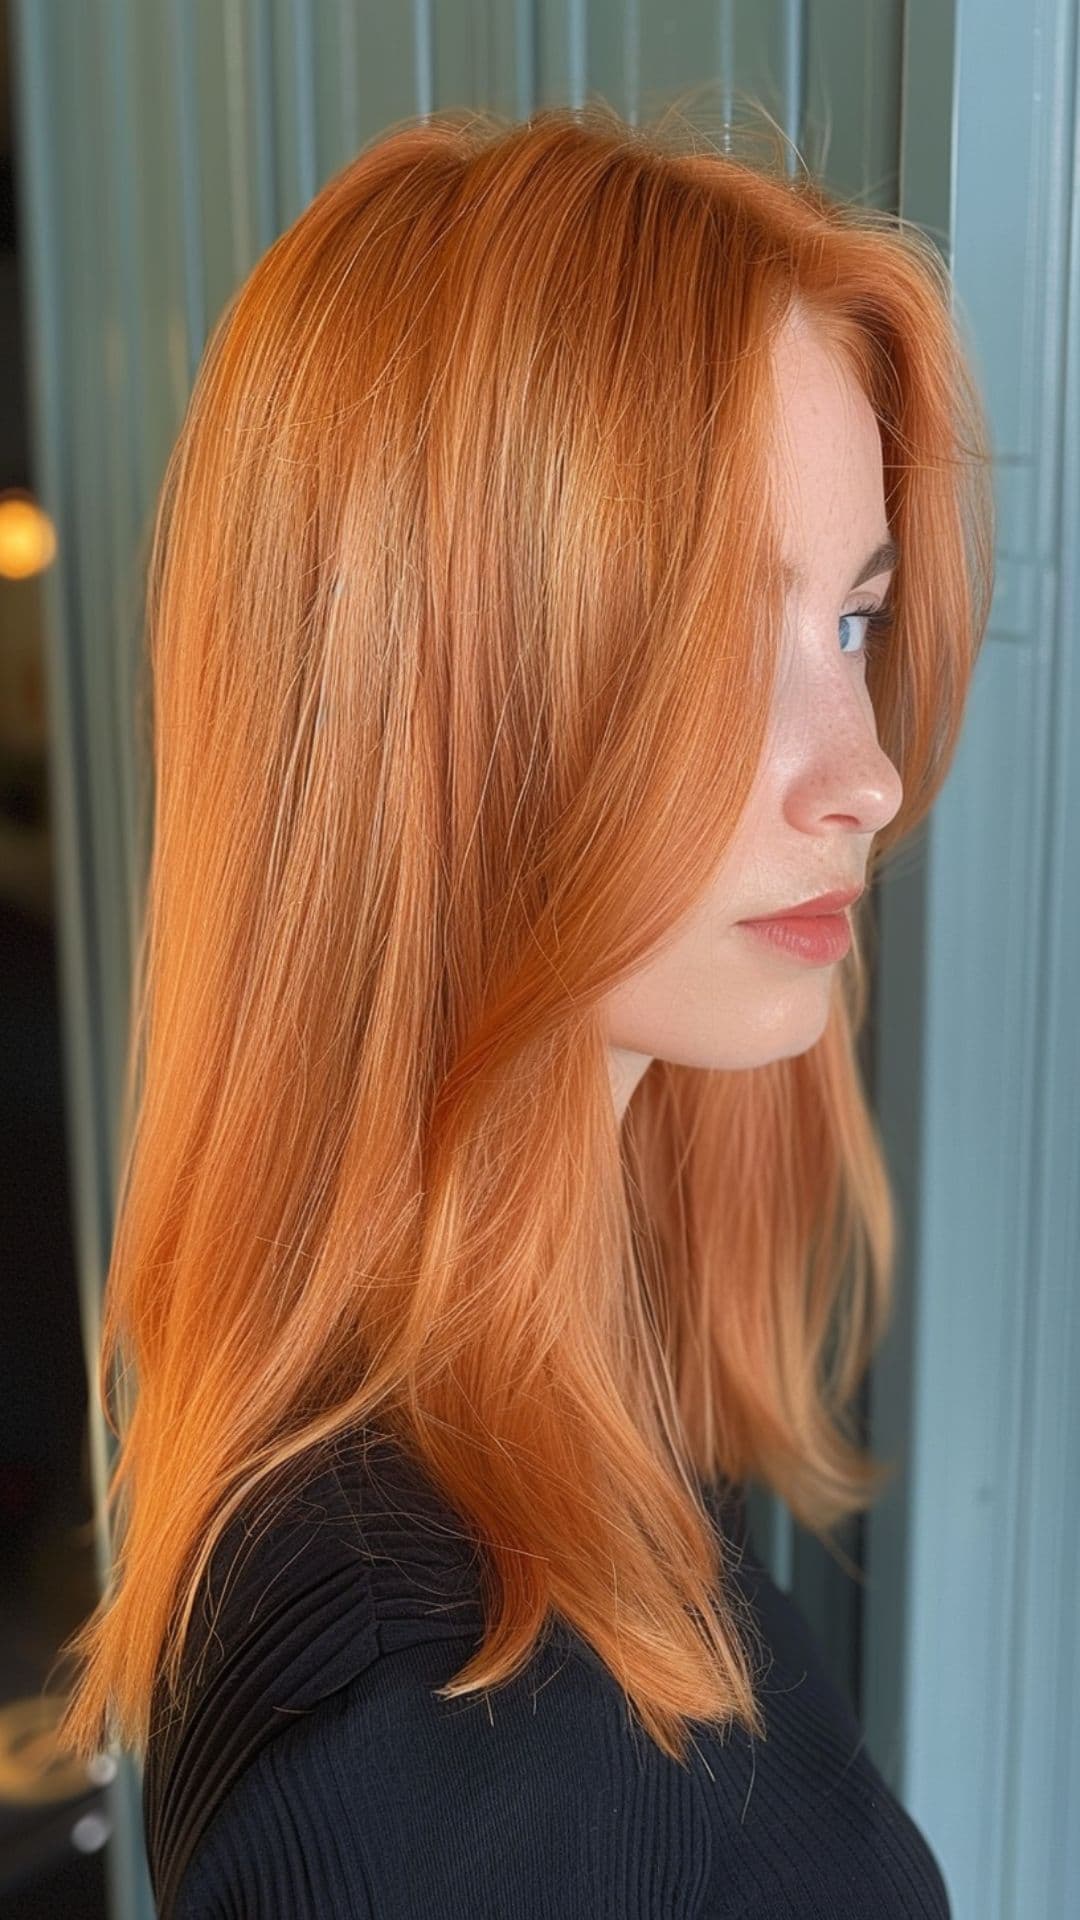 A young woman modelling a peach hair.